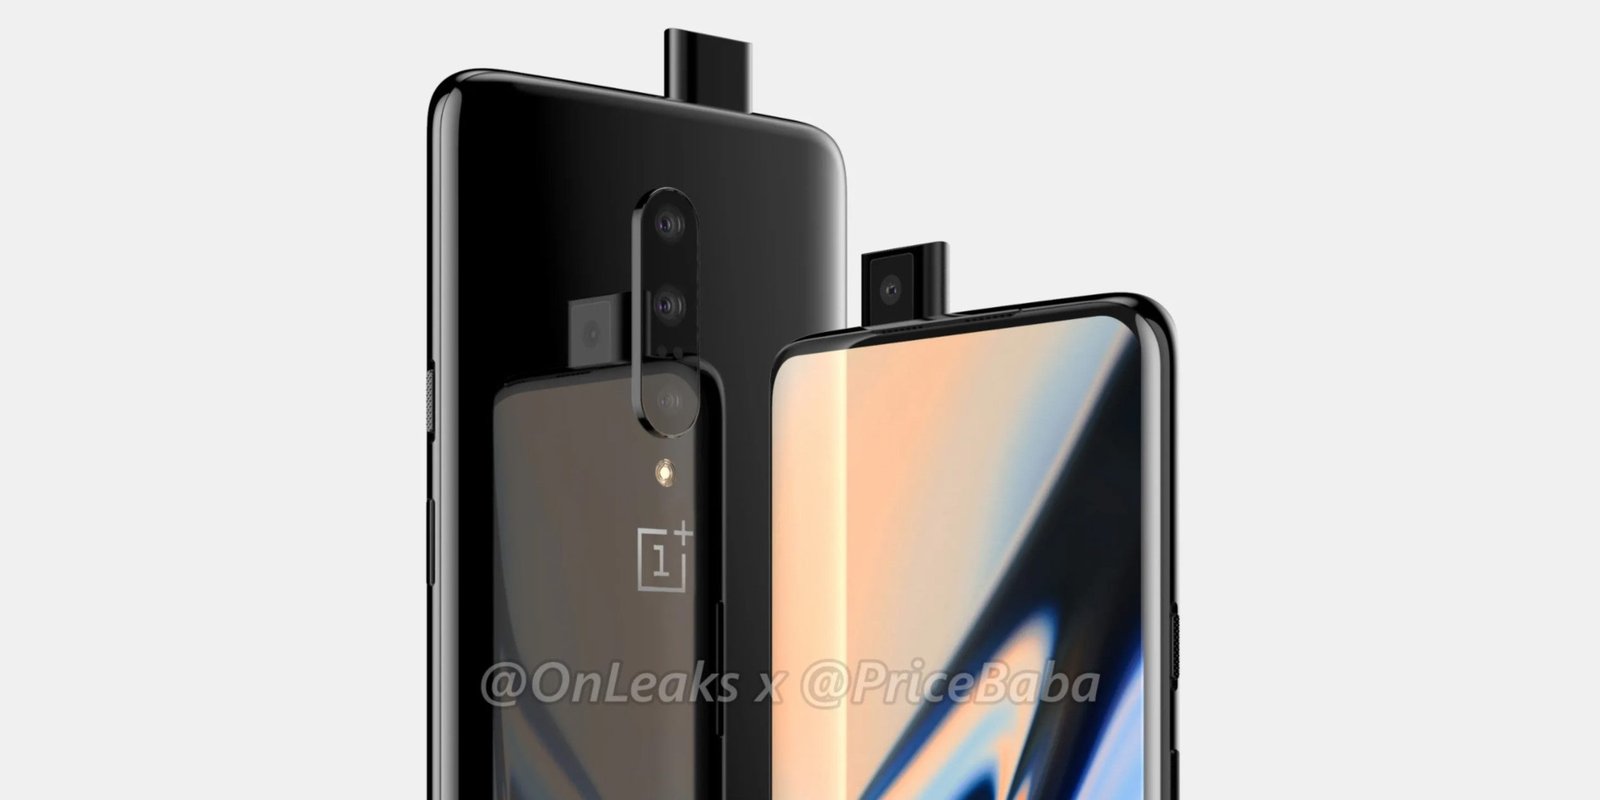 Display and Camera Details of the OnePlus 7 Pro Flagships Revealed 1